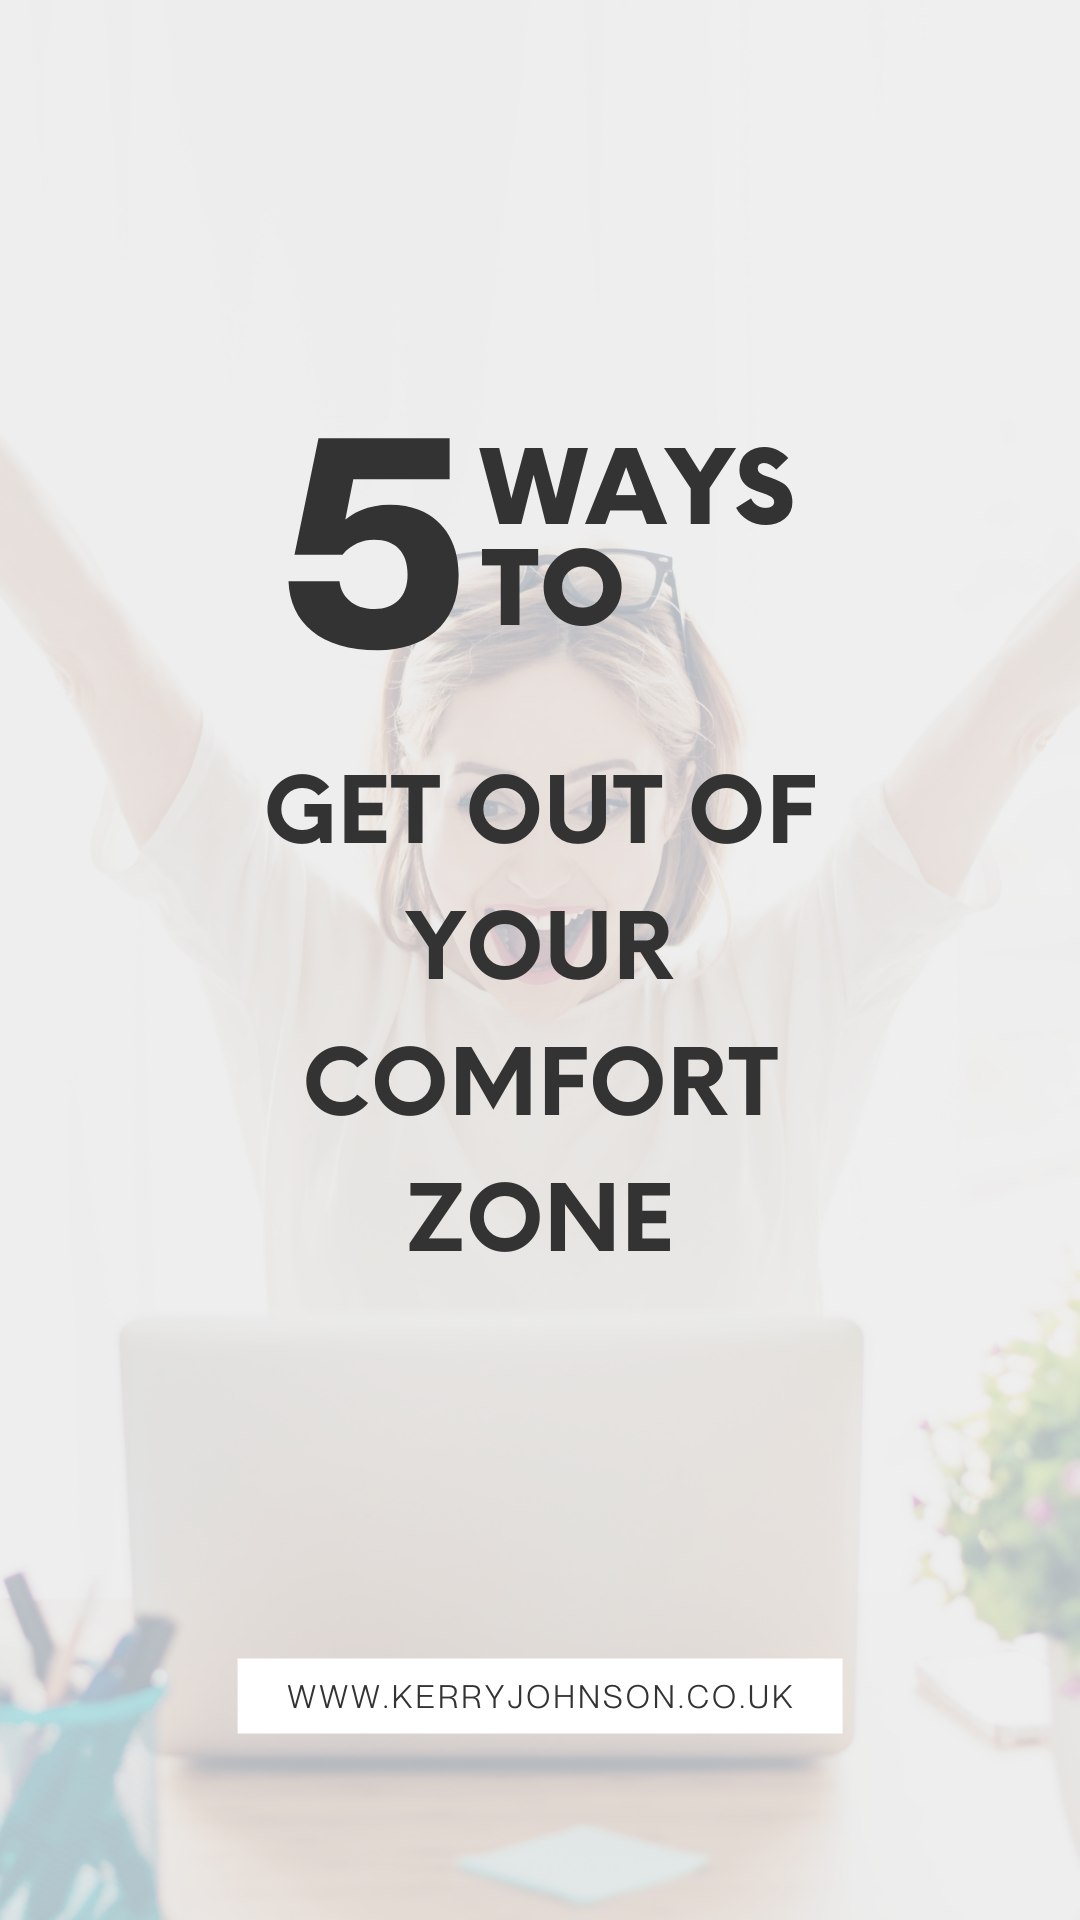 5 Ways to Get Your of Your Comfort Zone